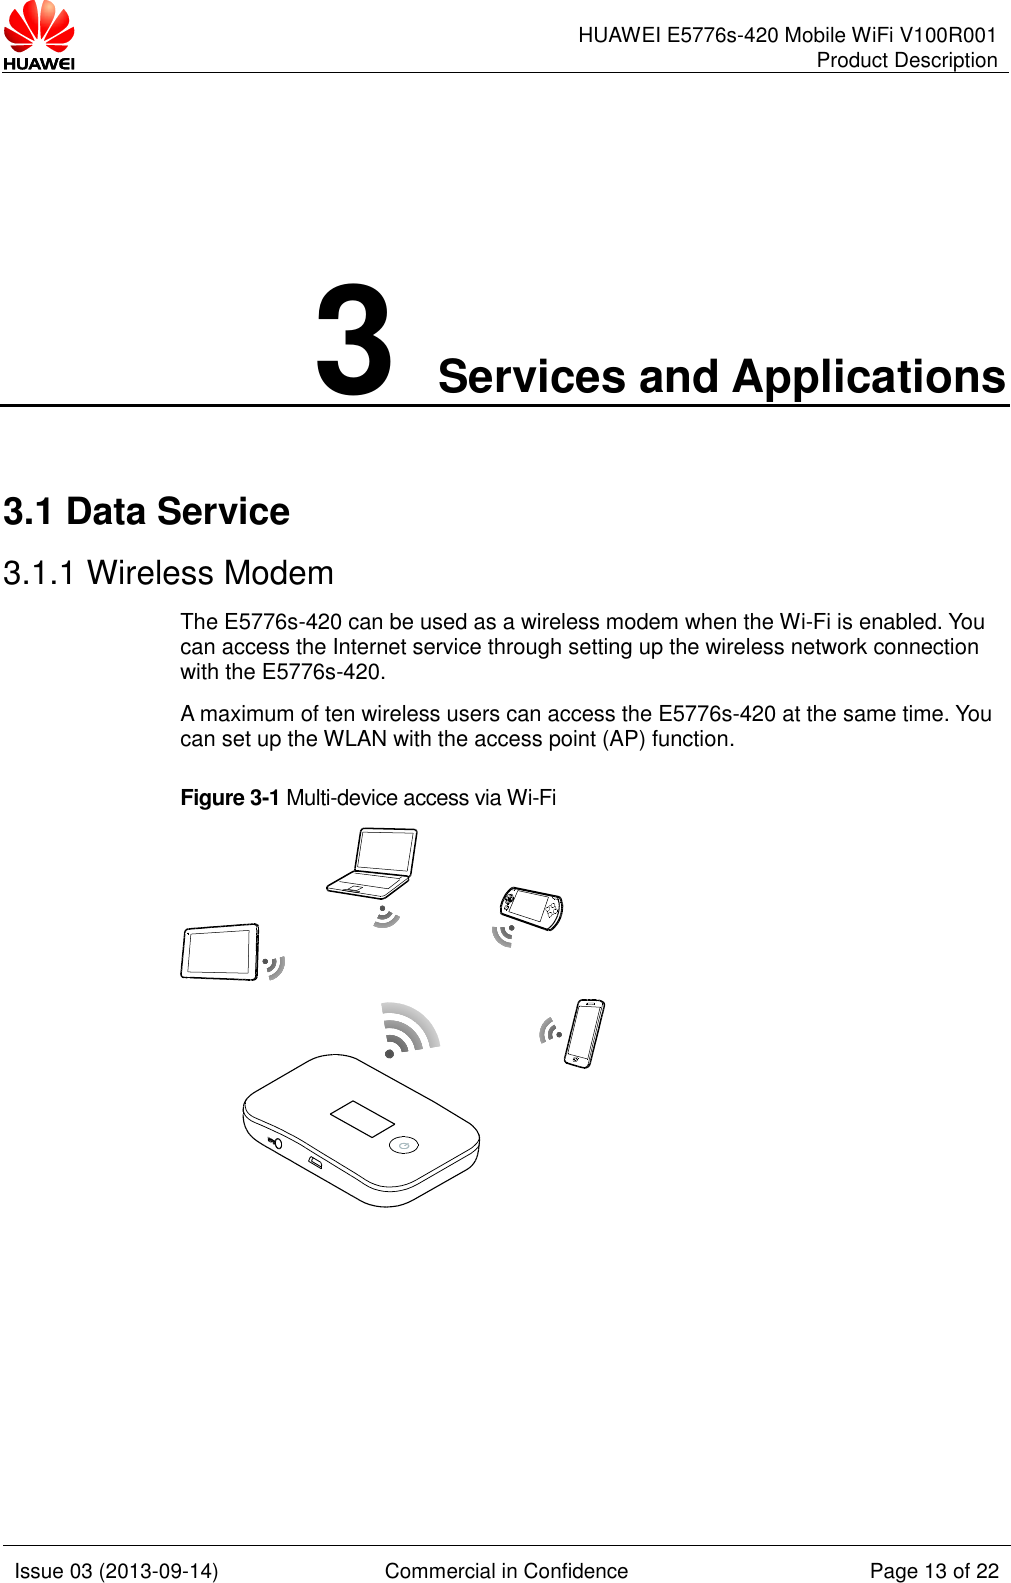      HUAWEI E5776s-420 Mobile WiFi V100R001 Product Description    Issue 03 (2013-09-14) Commercial in Confidence Page 13 of 22  3 Services and Applications 3.1 Data Service 3.1.1 Wireless Modem The E5776s-420 can be used as a wireless modem when the Wi-Fi is enabled. You can access the Internet service through setting up the wireless network connection with the E5776s-420.   A maximum of ten wireless users can access the E5776s-420 at the same time. You can set up the WLAN with the access point (AP) function. Figure 3-1 Multi-device access via Wi-Fi   